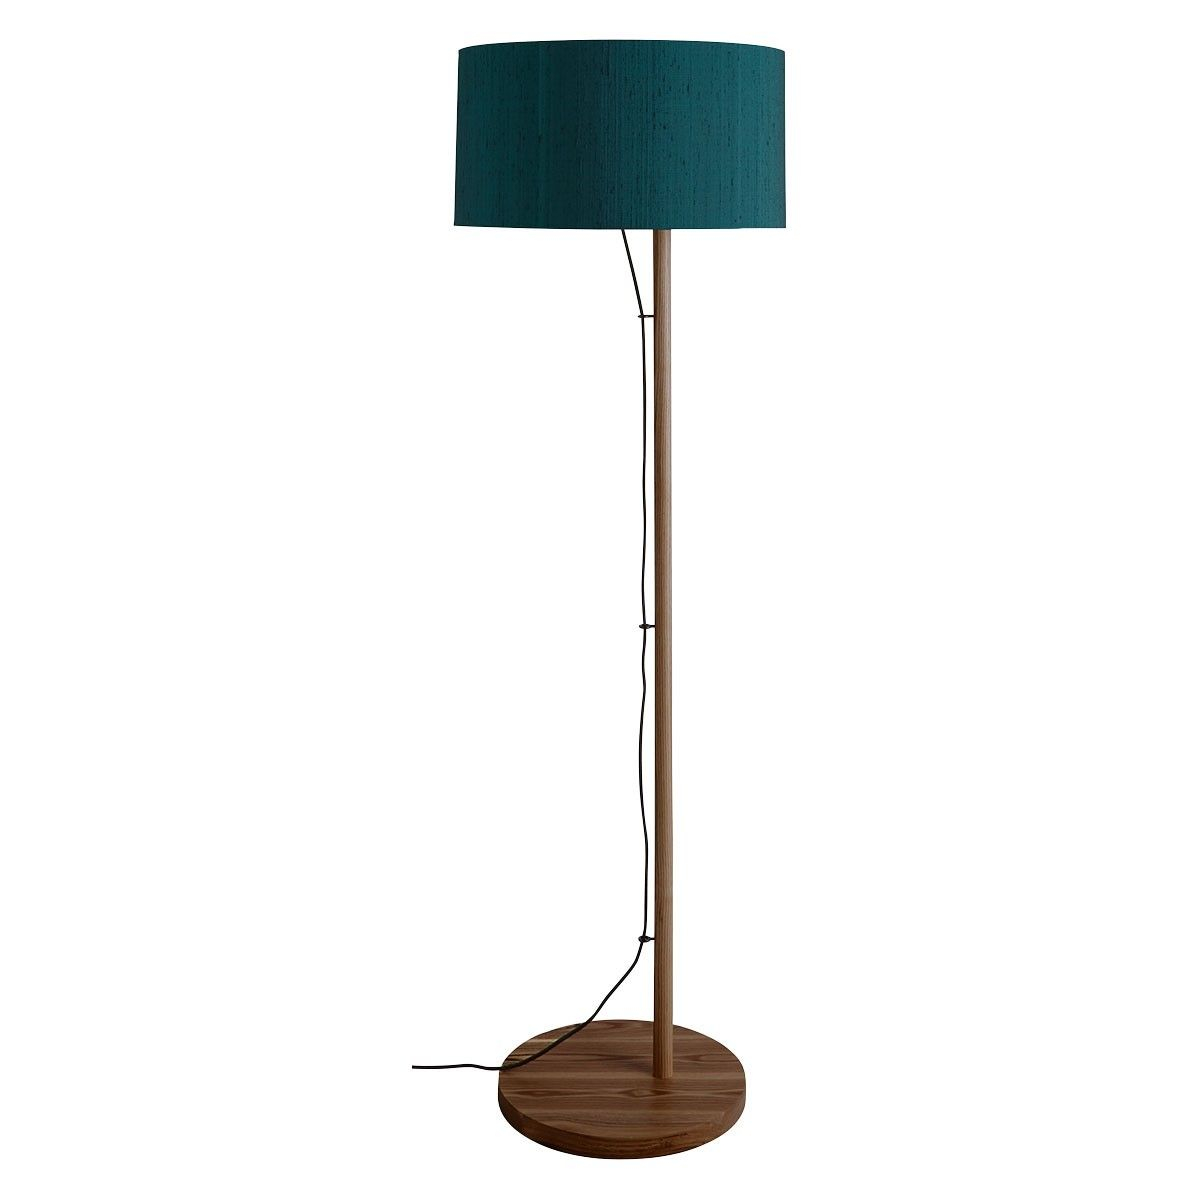 Leigh Leigh Walnut Floor Lamp With Ink Drum Silk Shade In throughout dimensions 1200 X 1200